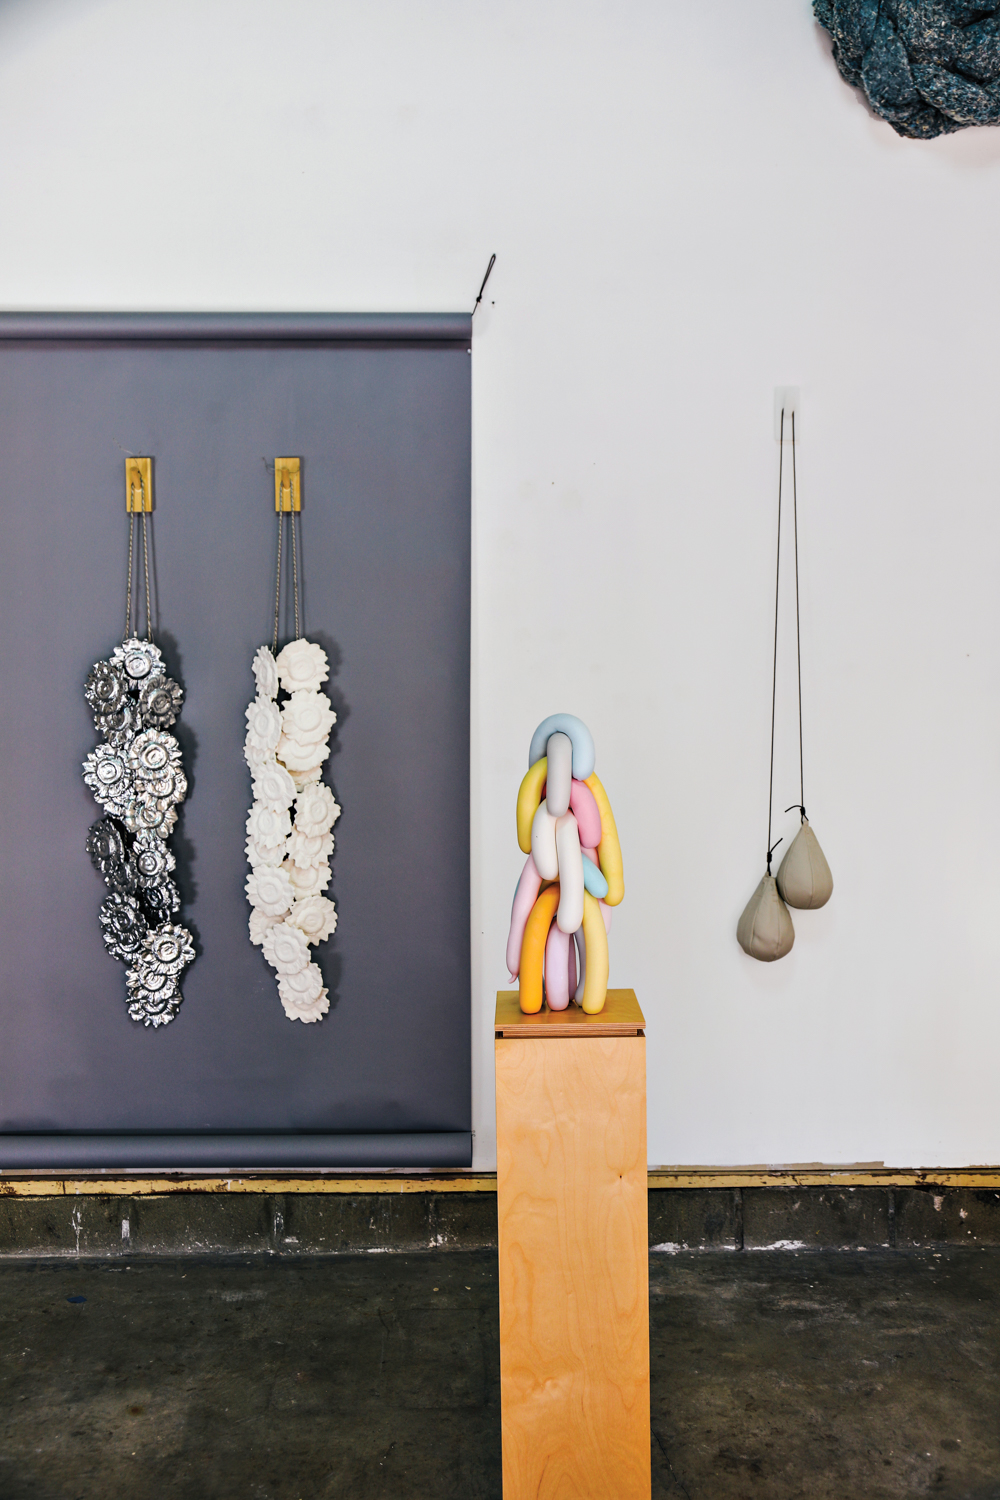 cast floral objects hung on wall beside sculpture of stacked cast balloons